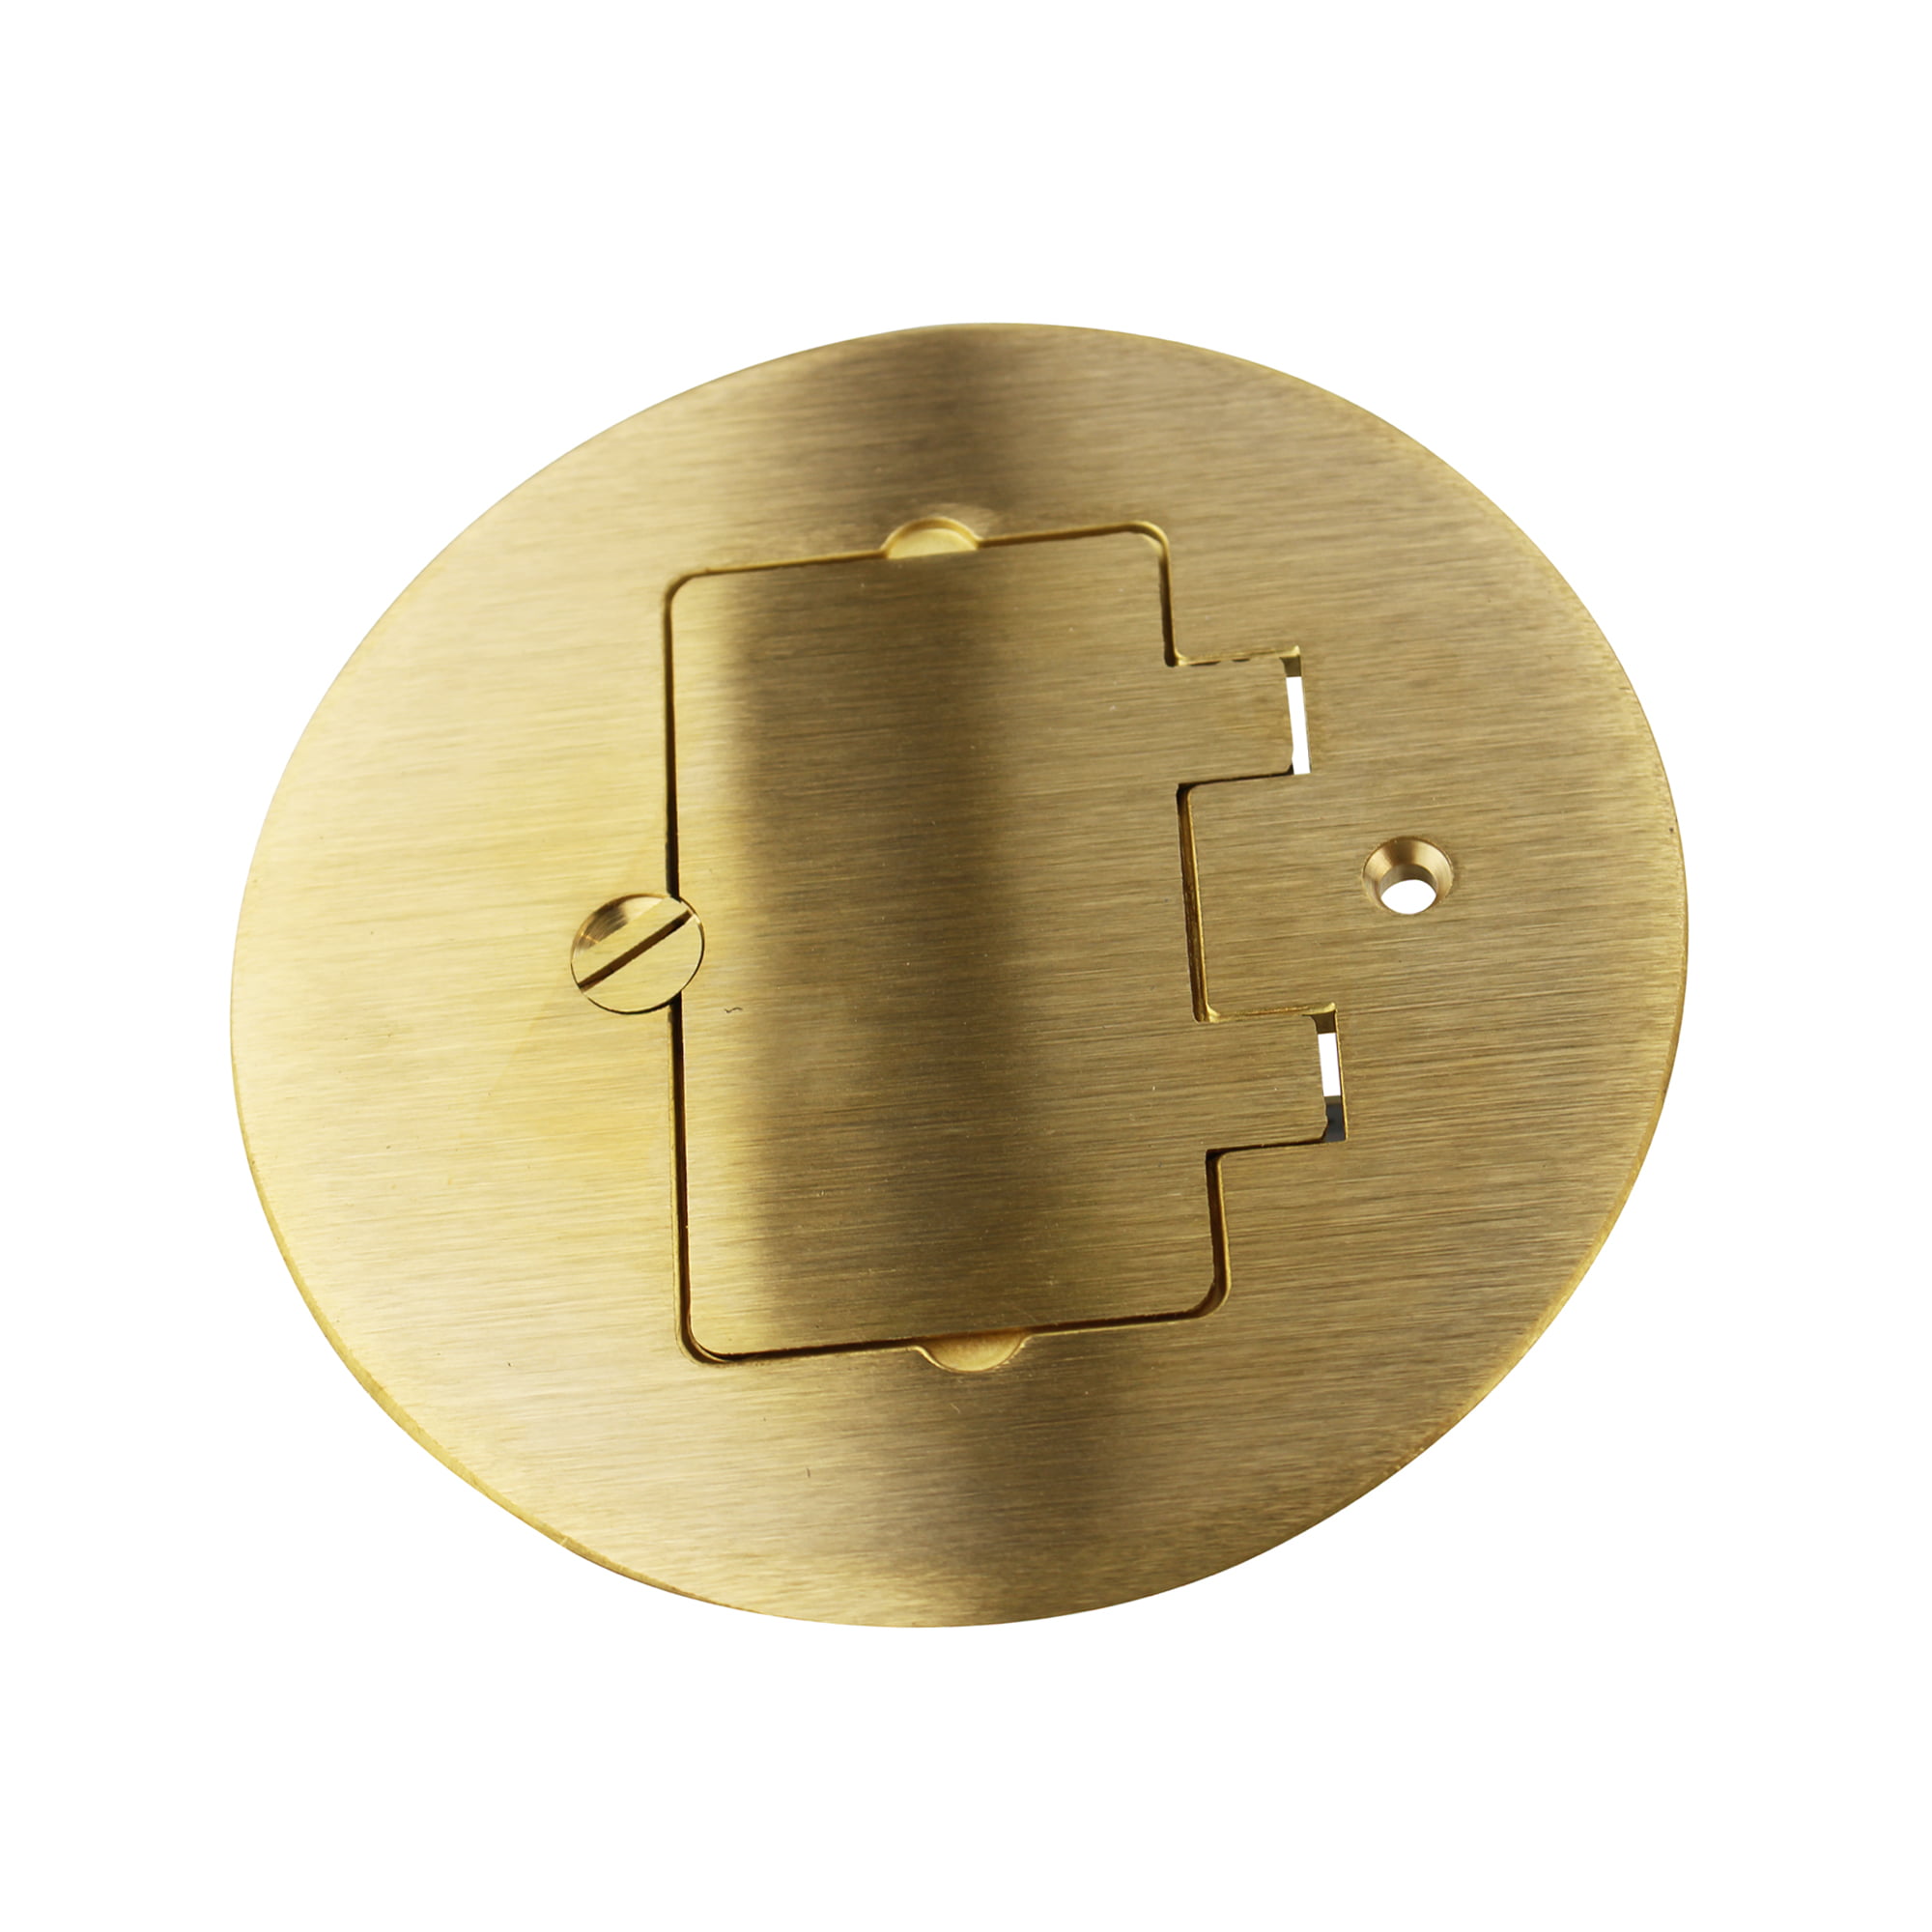 WIREMOLD LEGRAND 895GFI BRASS ROUND CARPET COVER PLATE 